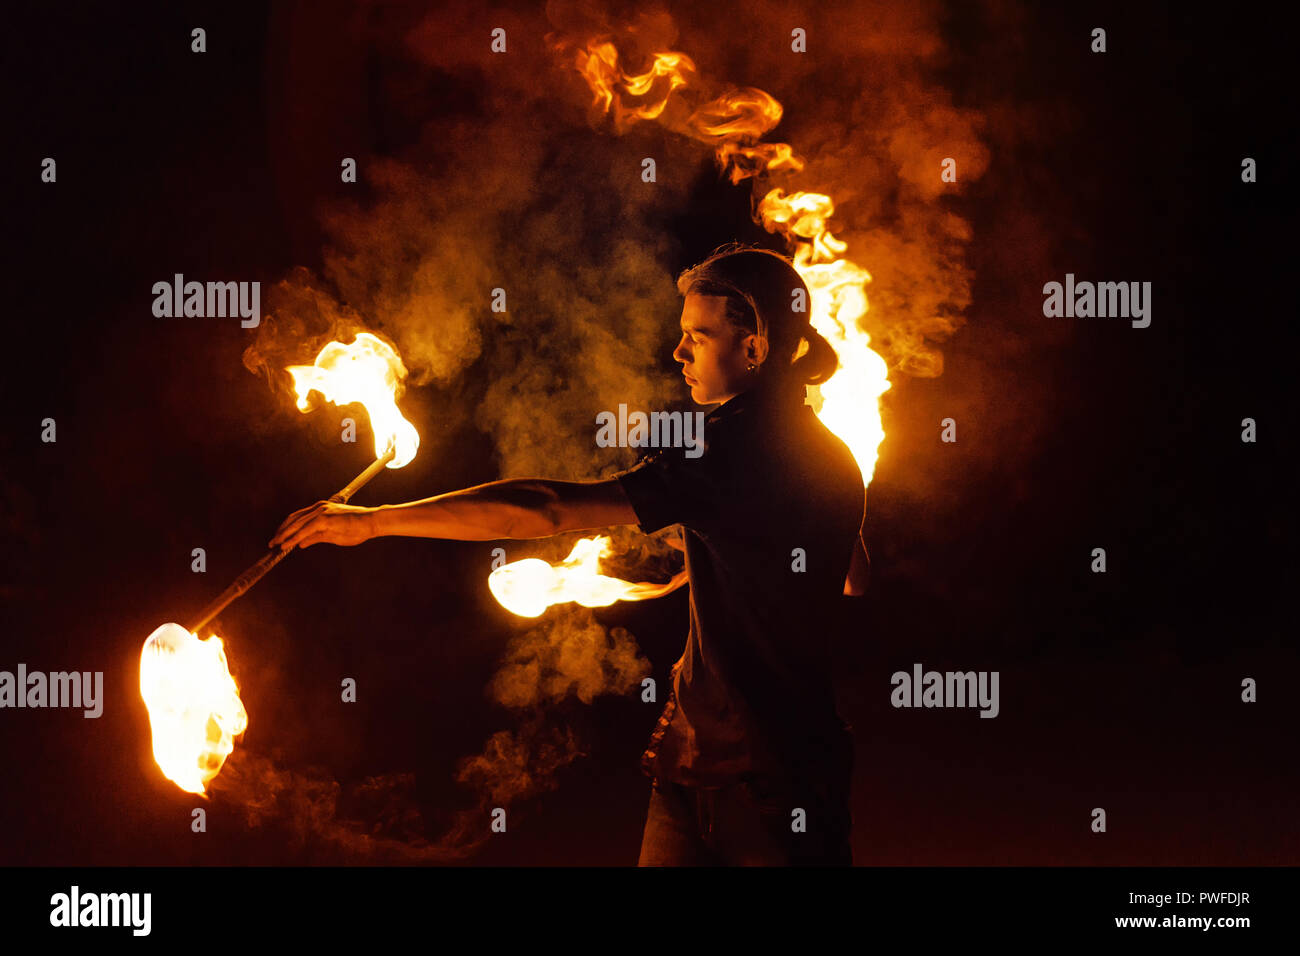 Fire show. Fire dancer dances with two Staff. Night performance. Dramatic portrait. Fire and smoke. A fascinating movement of the flame. Stock Photo